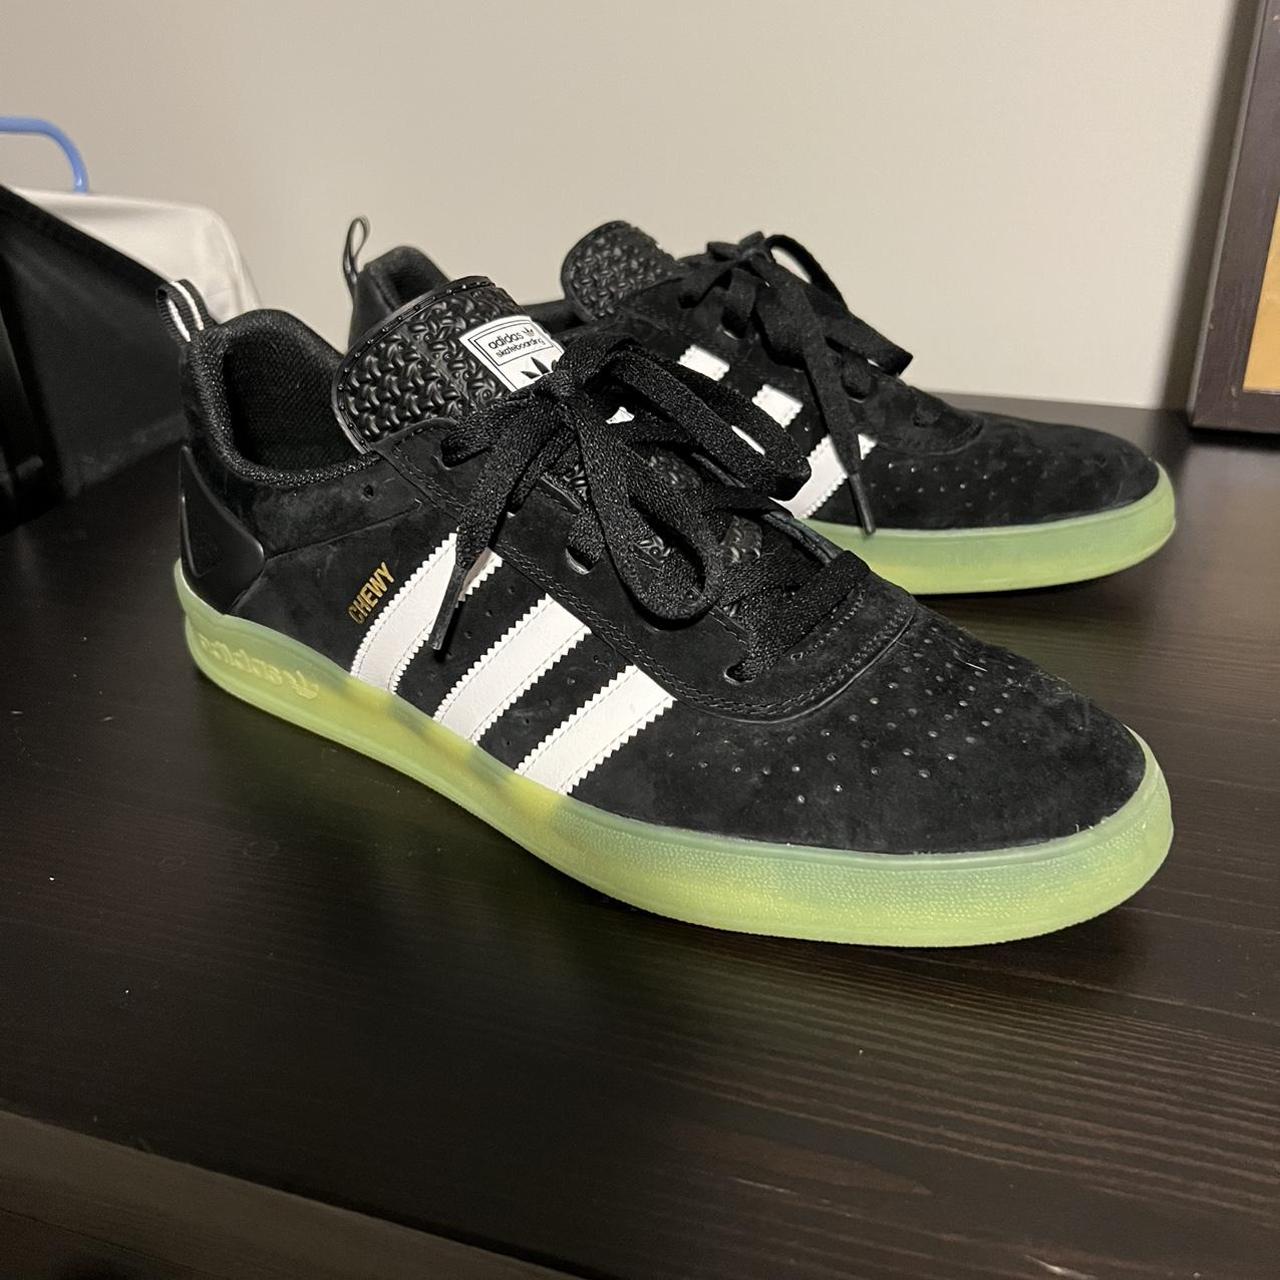 ADIDAS PRO. CHEWY COLORWAY. SIZE 9.5.... -